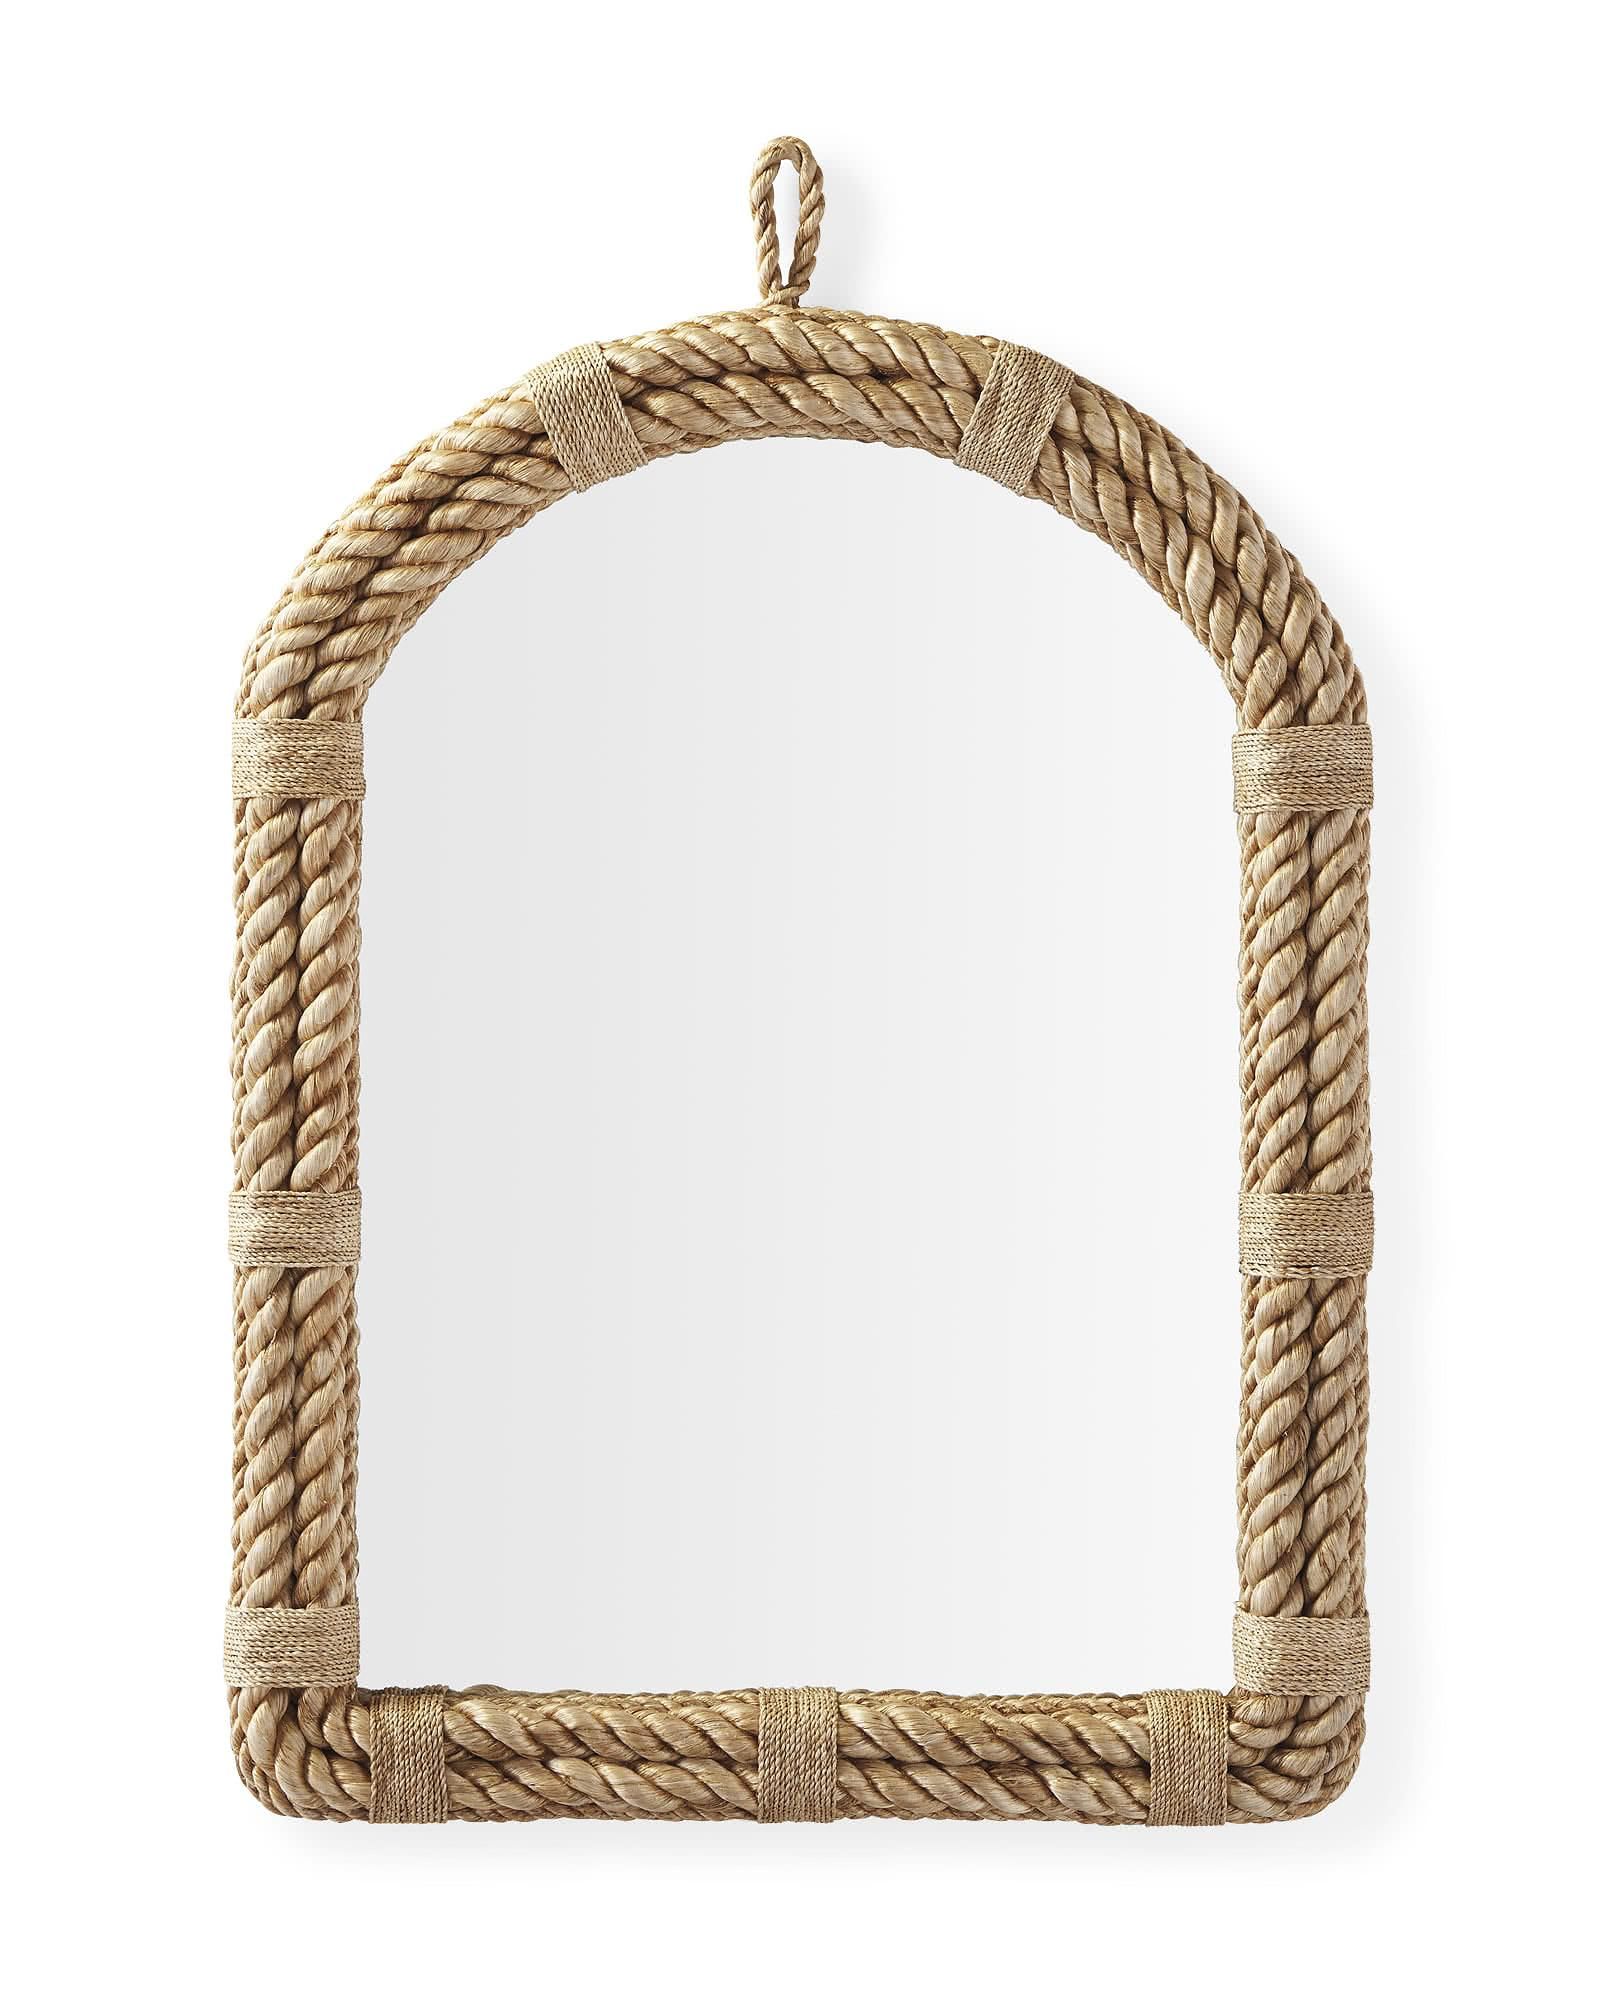 Nautical Rope Mirror - Arch | Serena and Lily